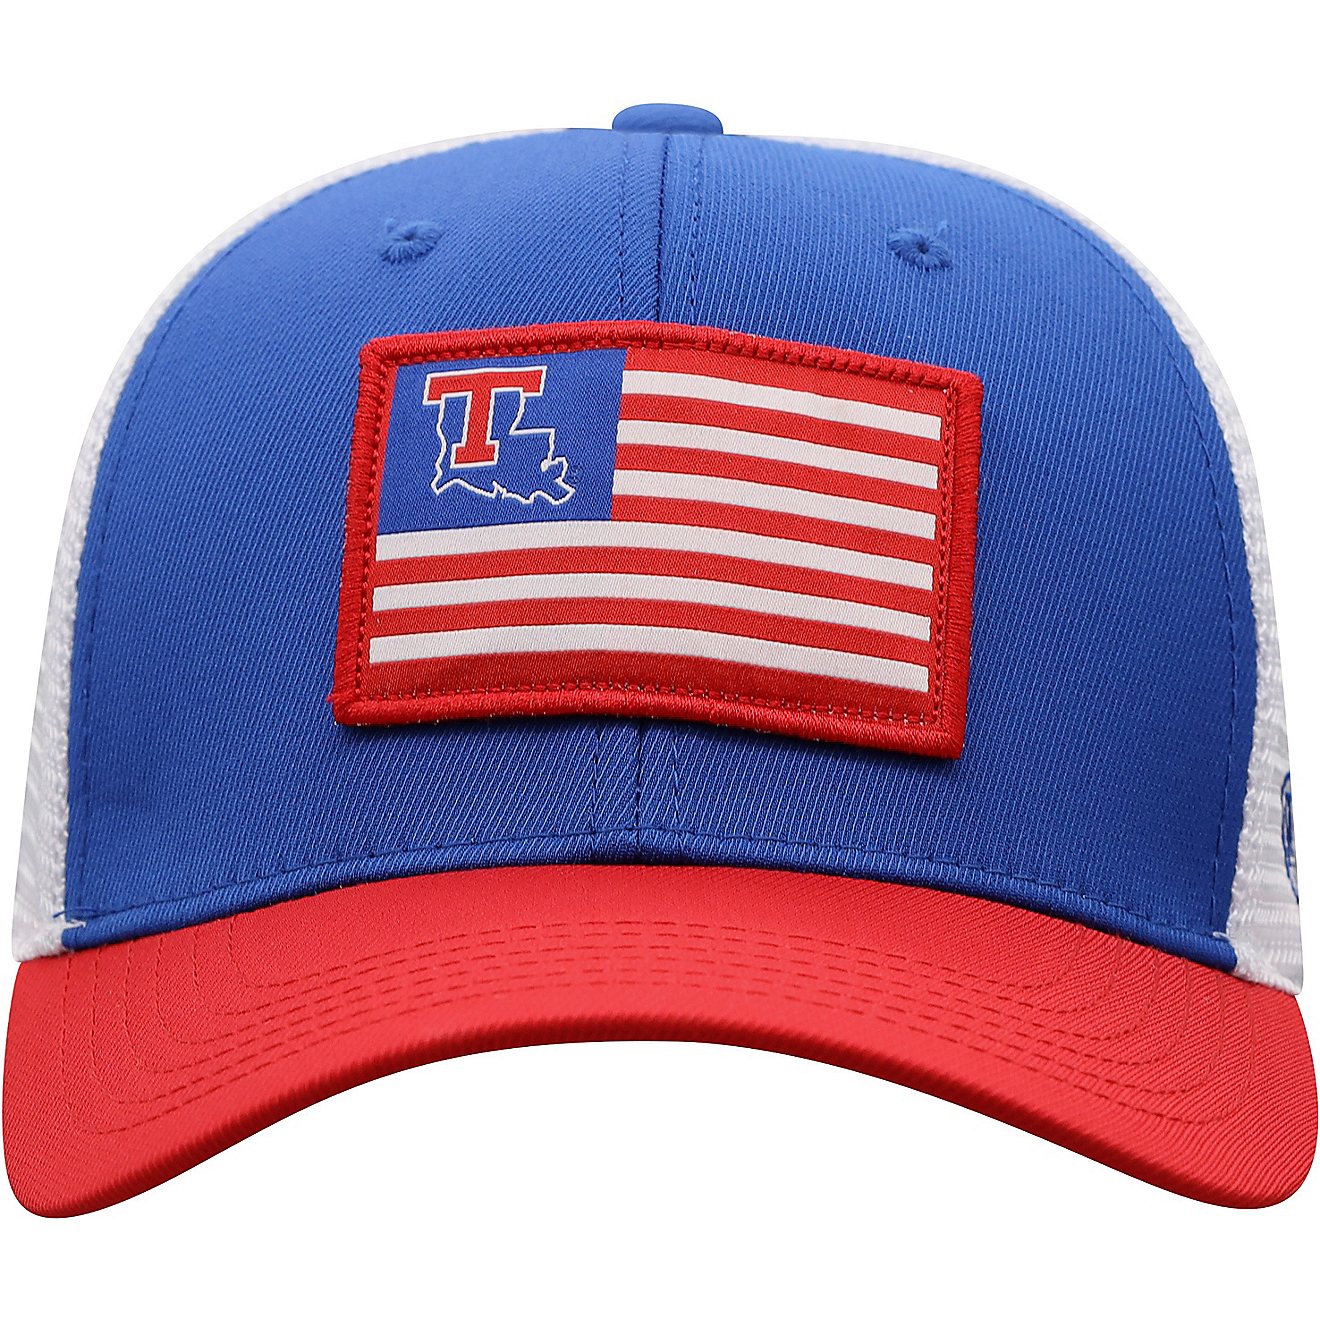 Top of the World Men's Louisiana Tech University Pedigree One Fit Cap                                                            - view number 2